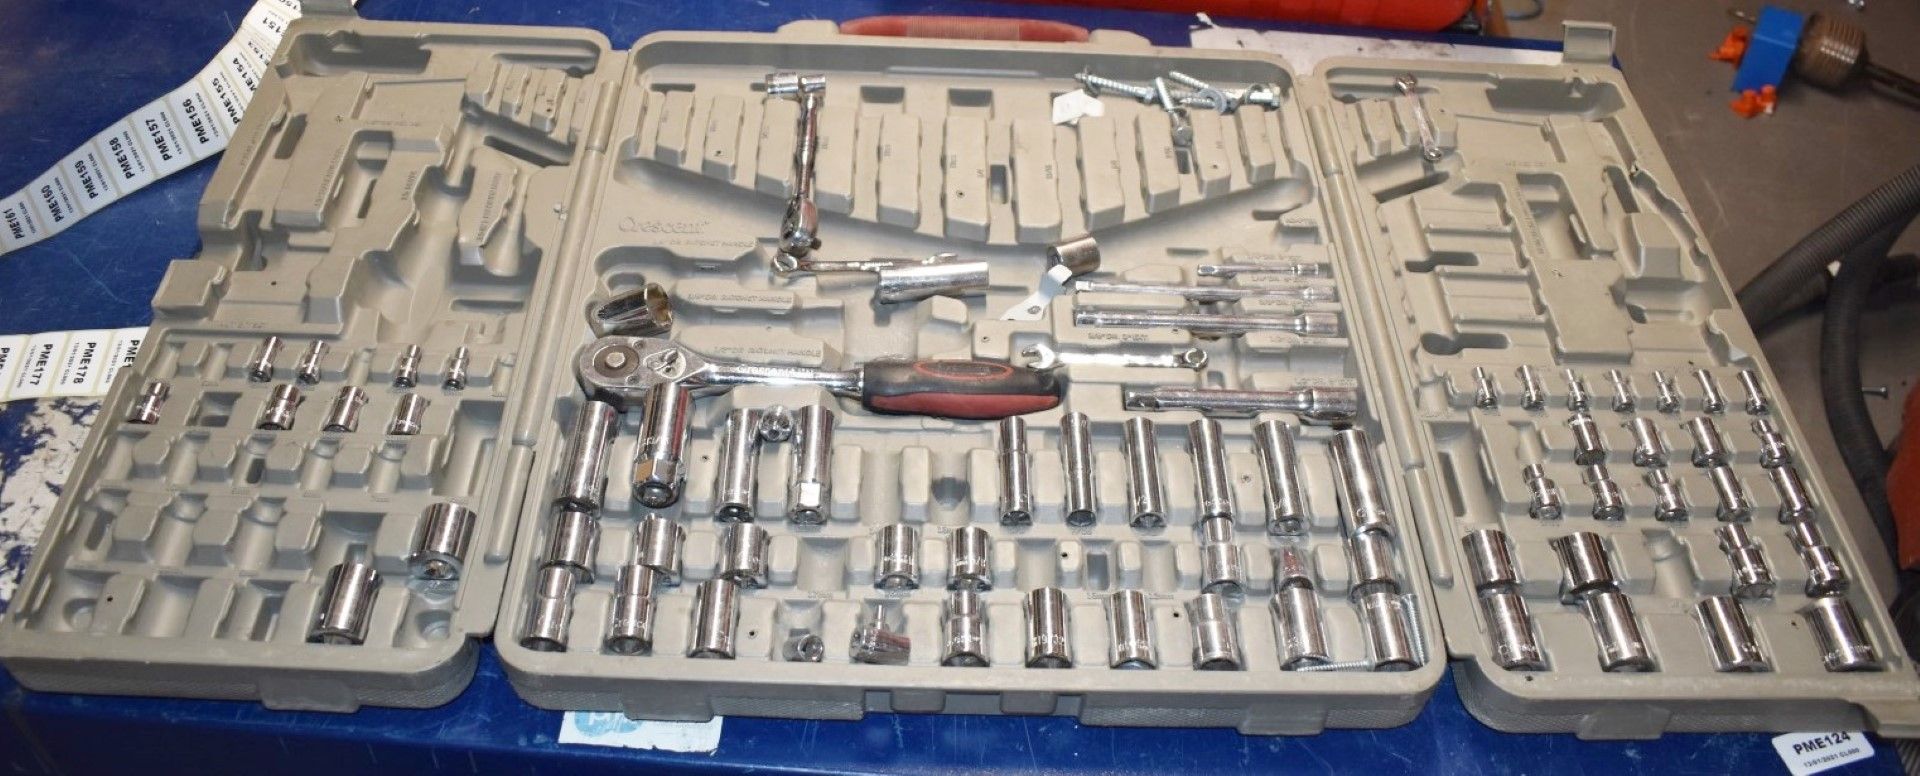 1 x Crescent Socket Wrench Set With Carry Case Incomplete But Contains Approx 70 Pieces - Image 2 of 9